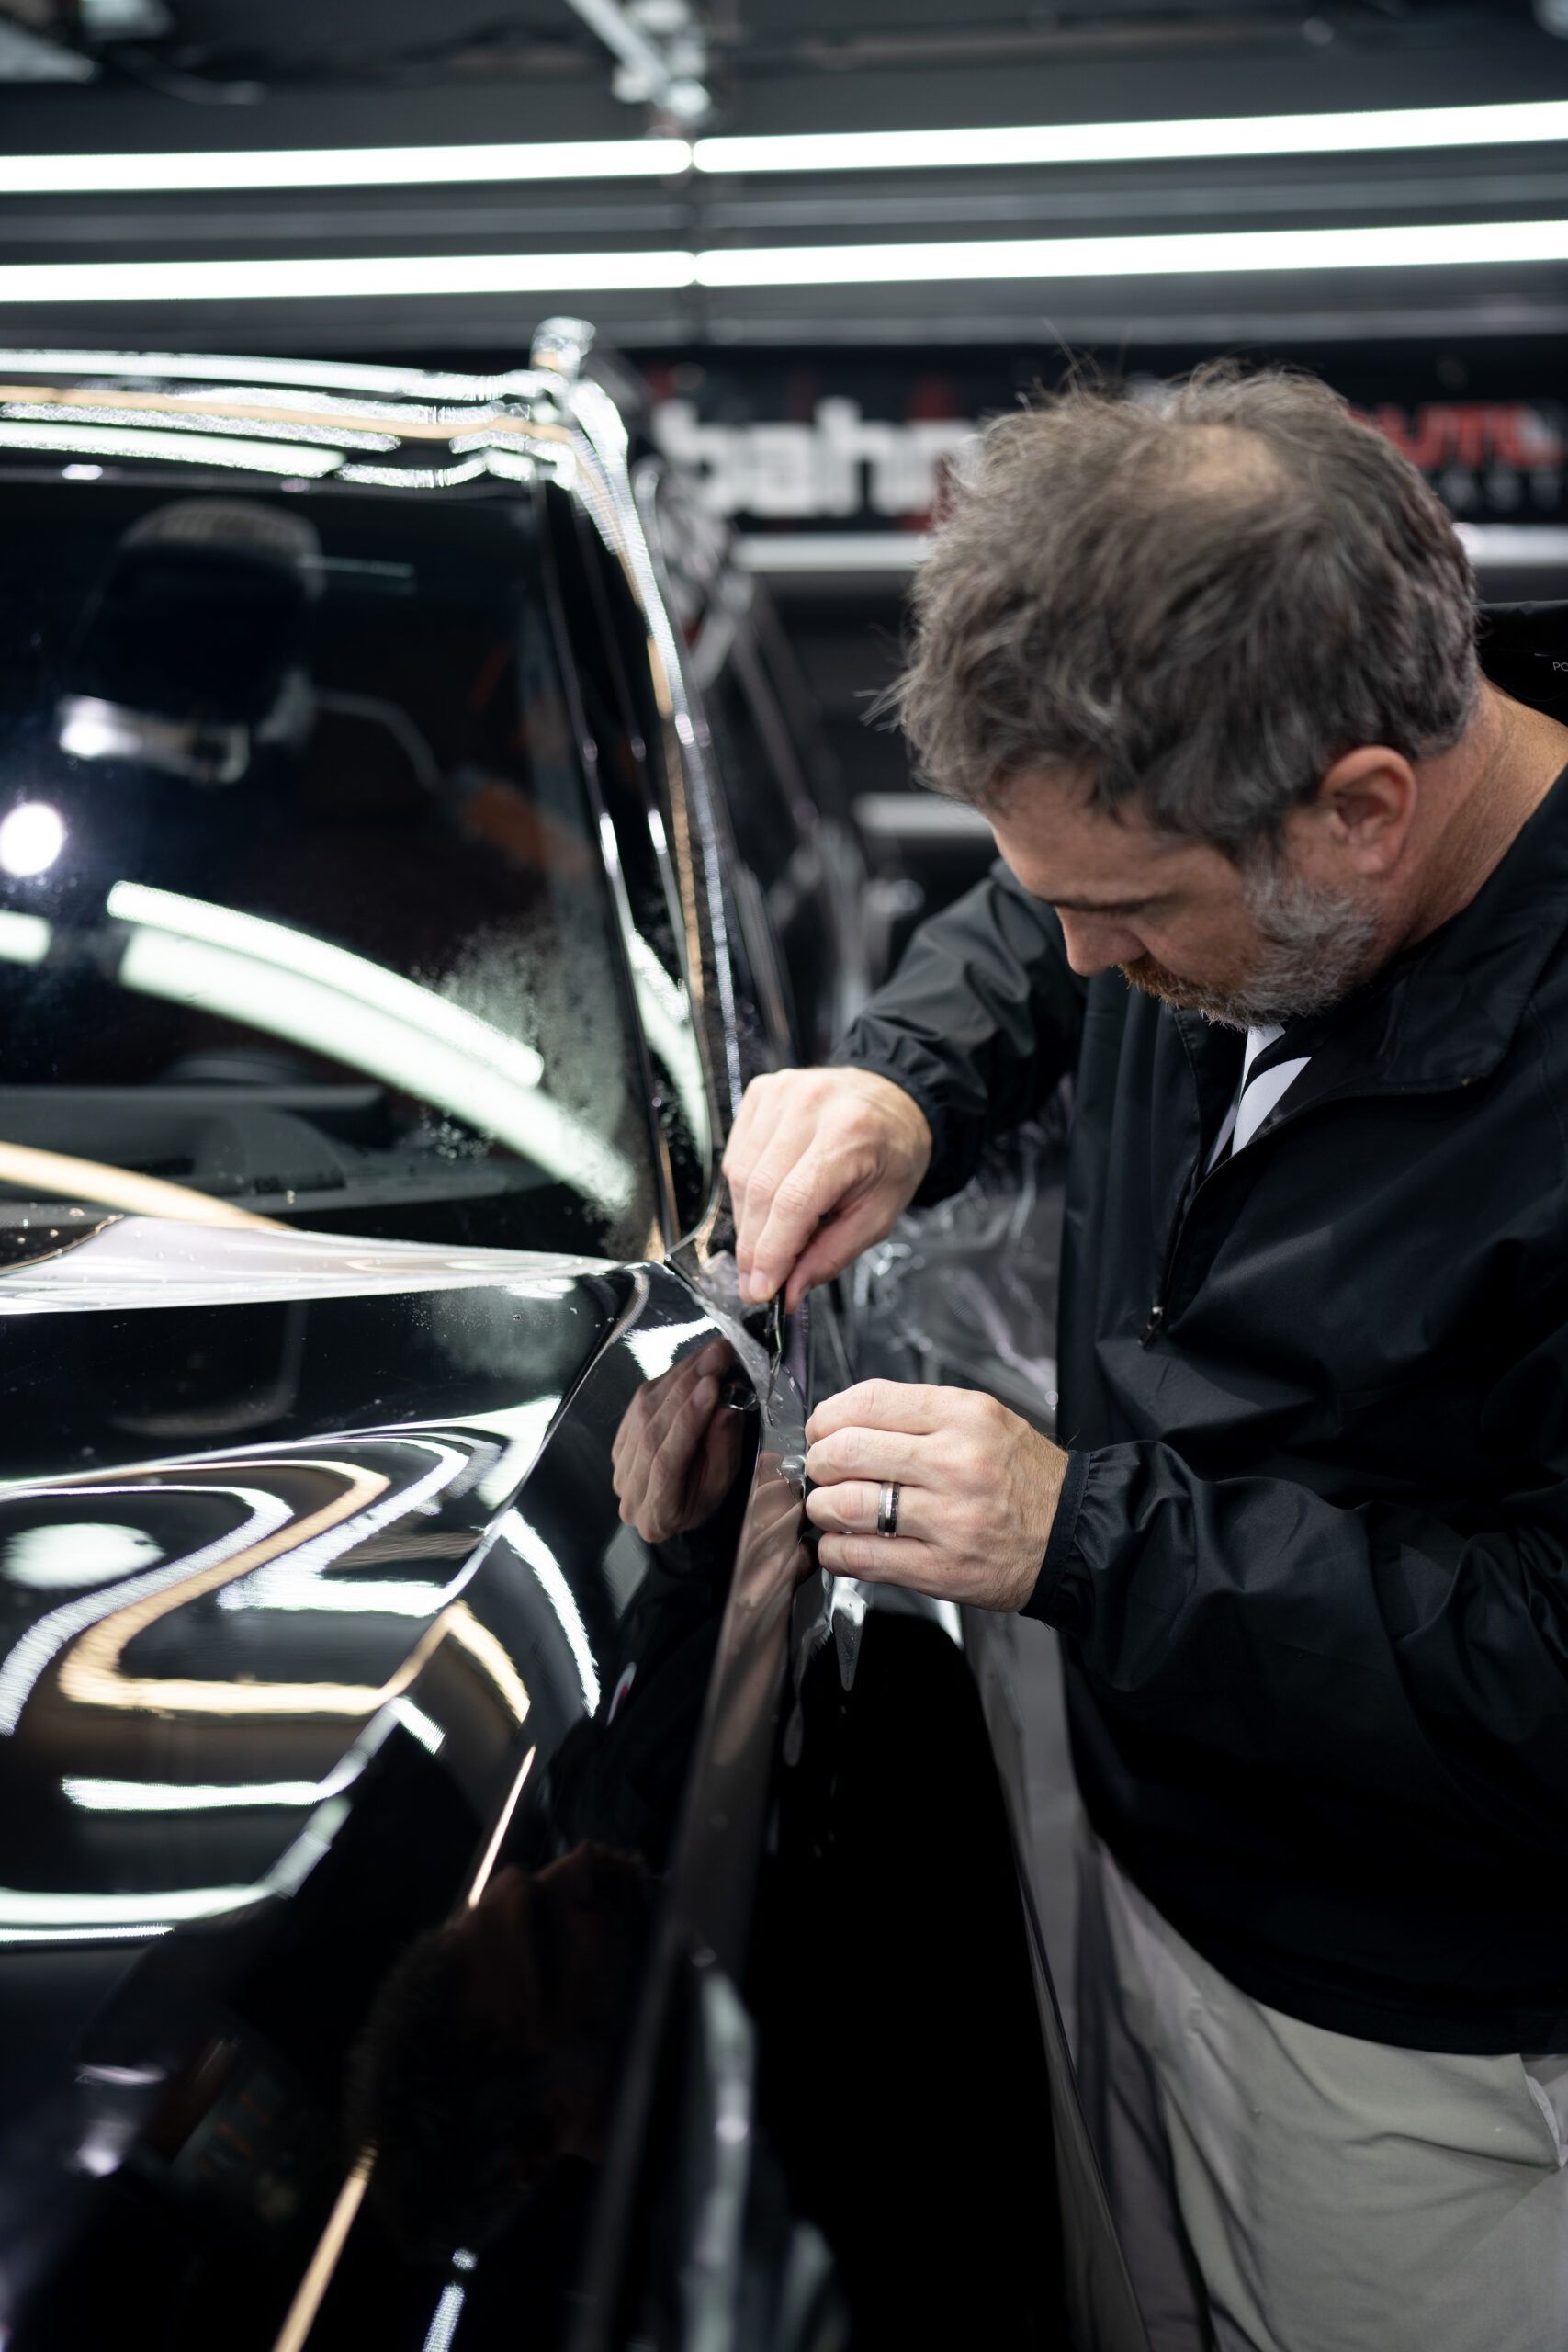 A man is working on a black car in a garage.